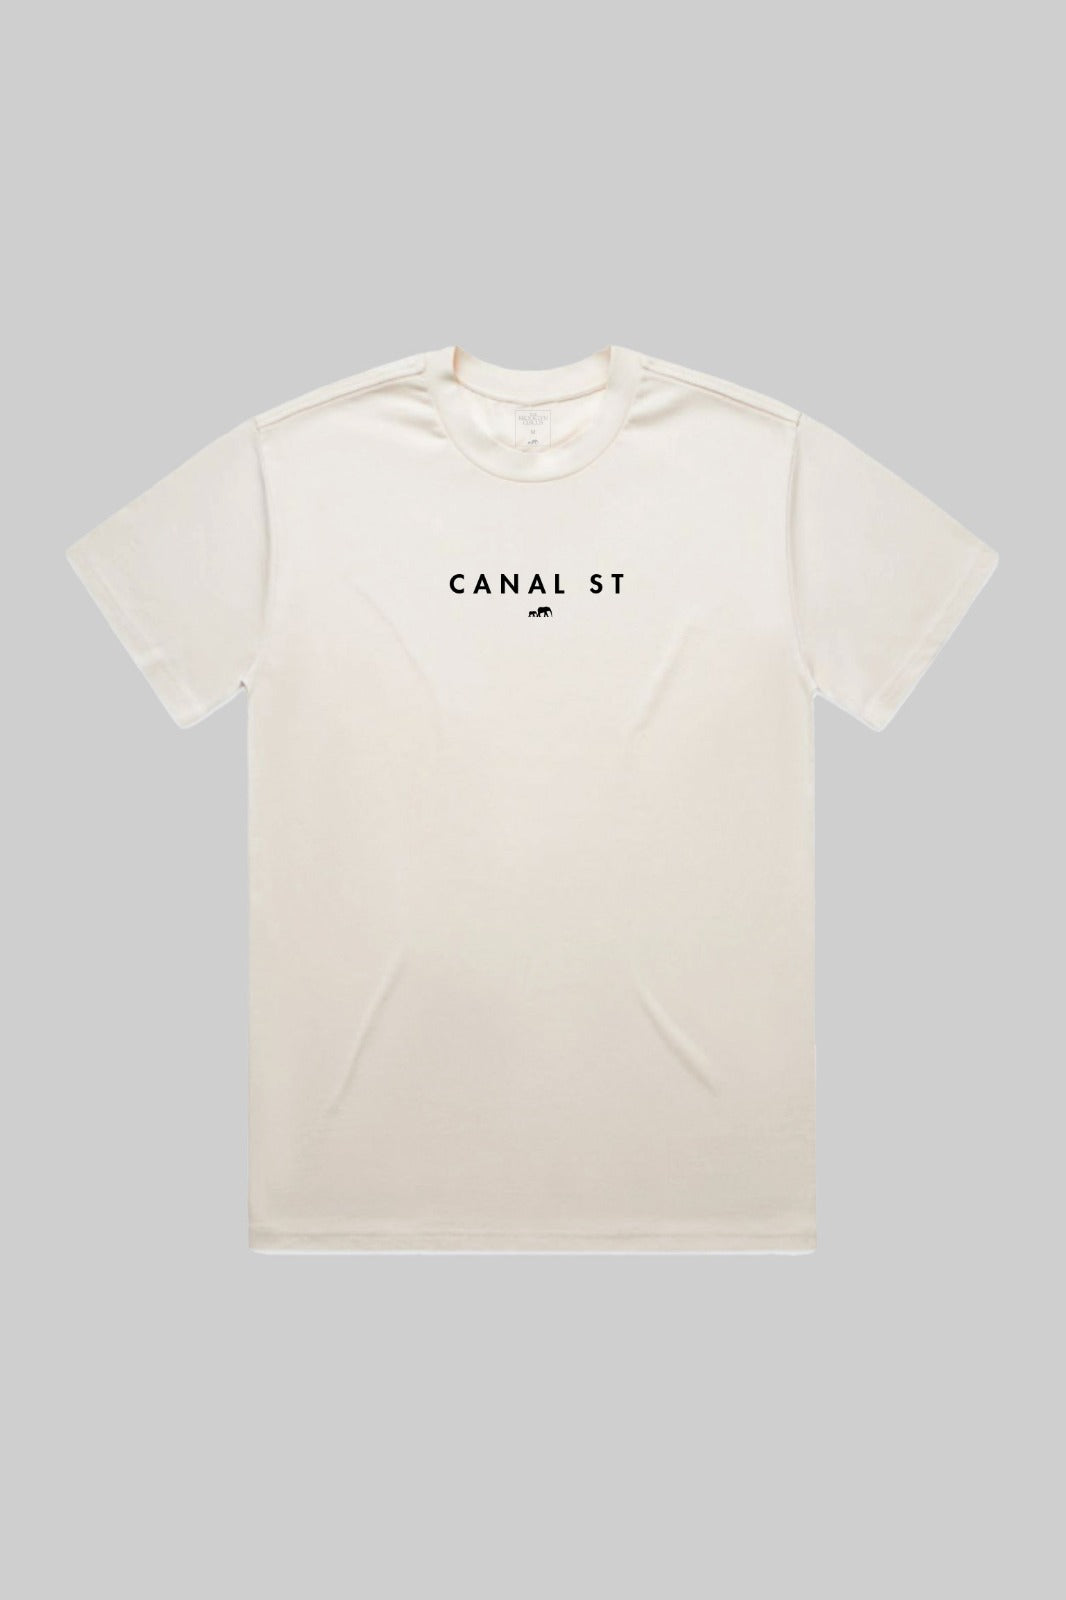 BKc Canal Street Back Wall  White Tee